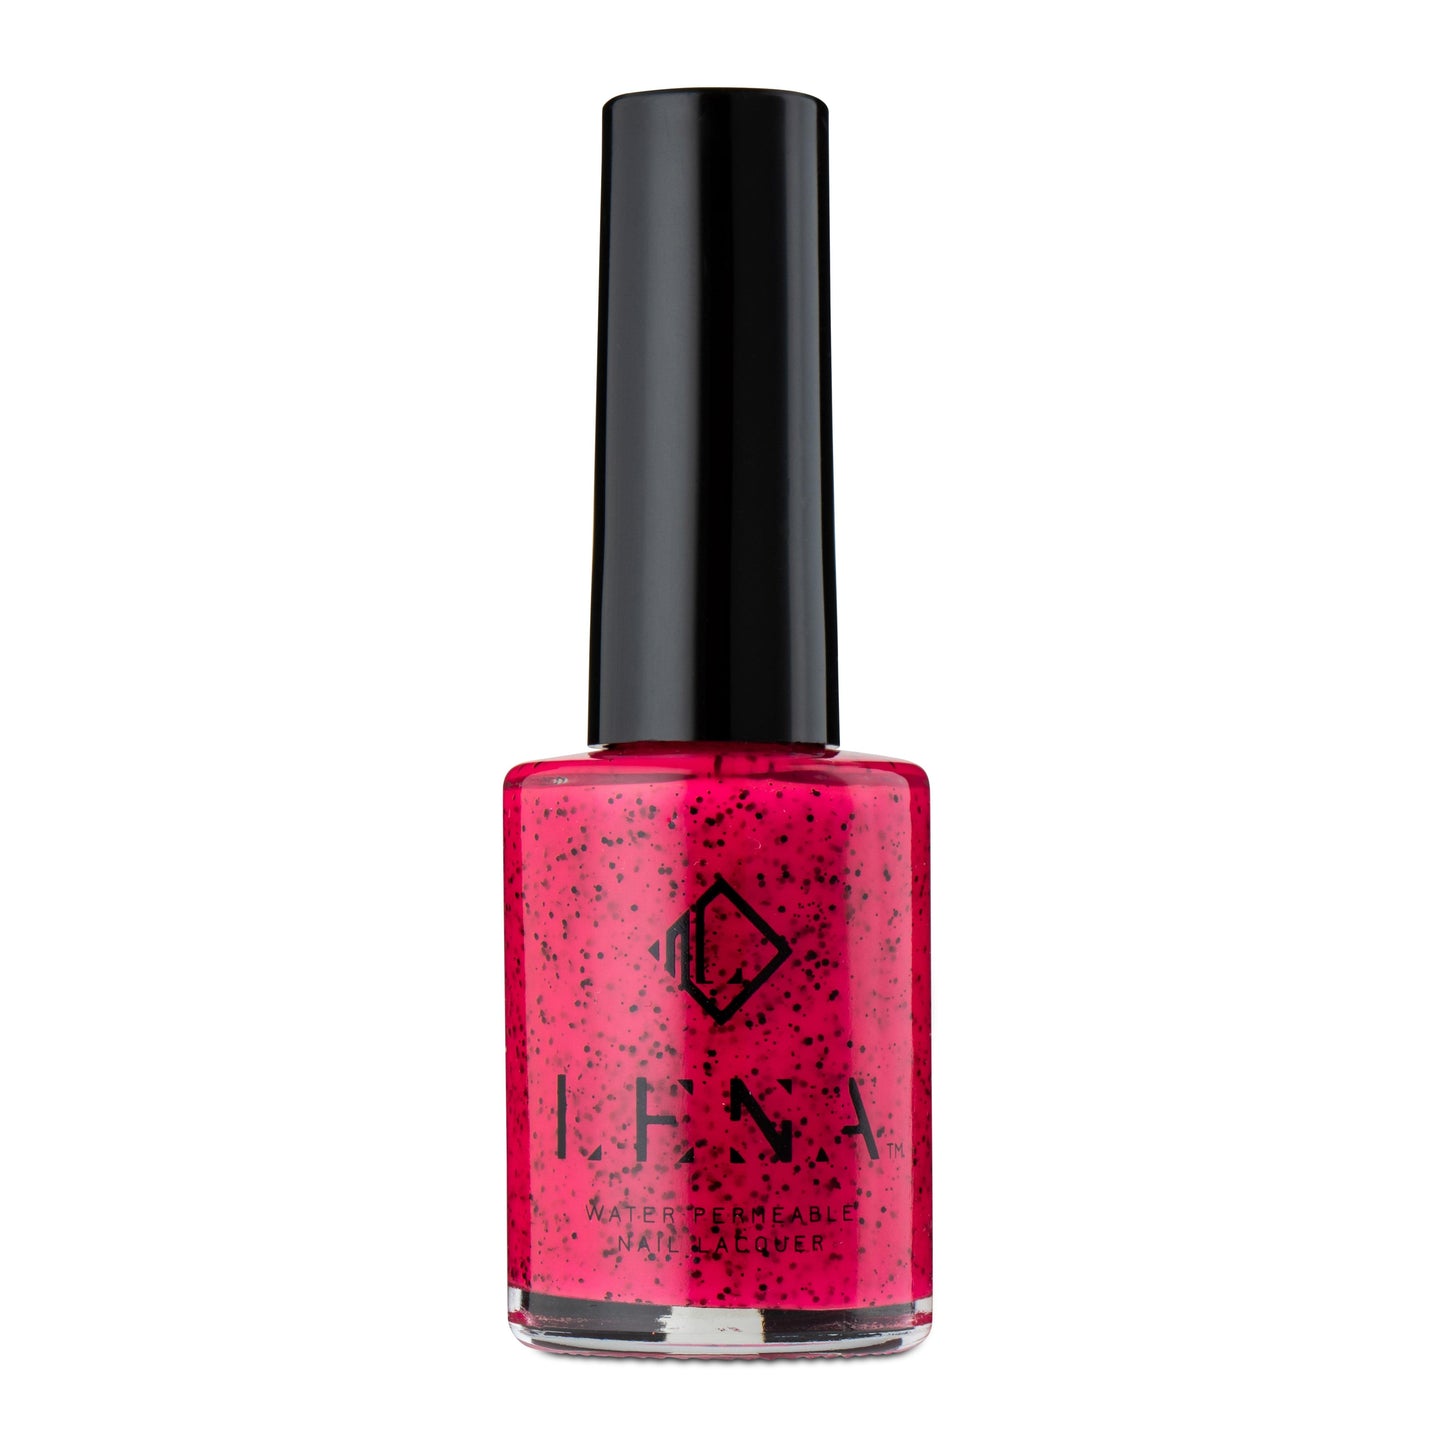 Speckled Pattern Breathable Halal Nail Polish - Water-melon with You? - SE10 - LENA NAIL POLISH DIRECT